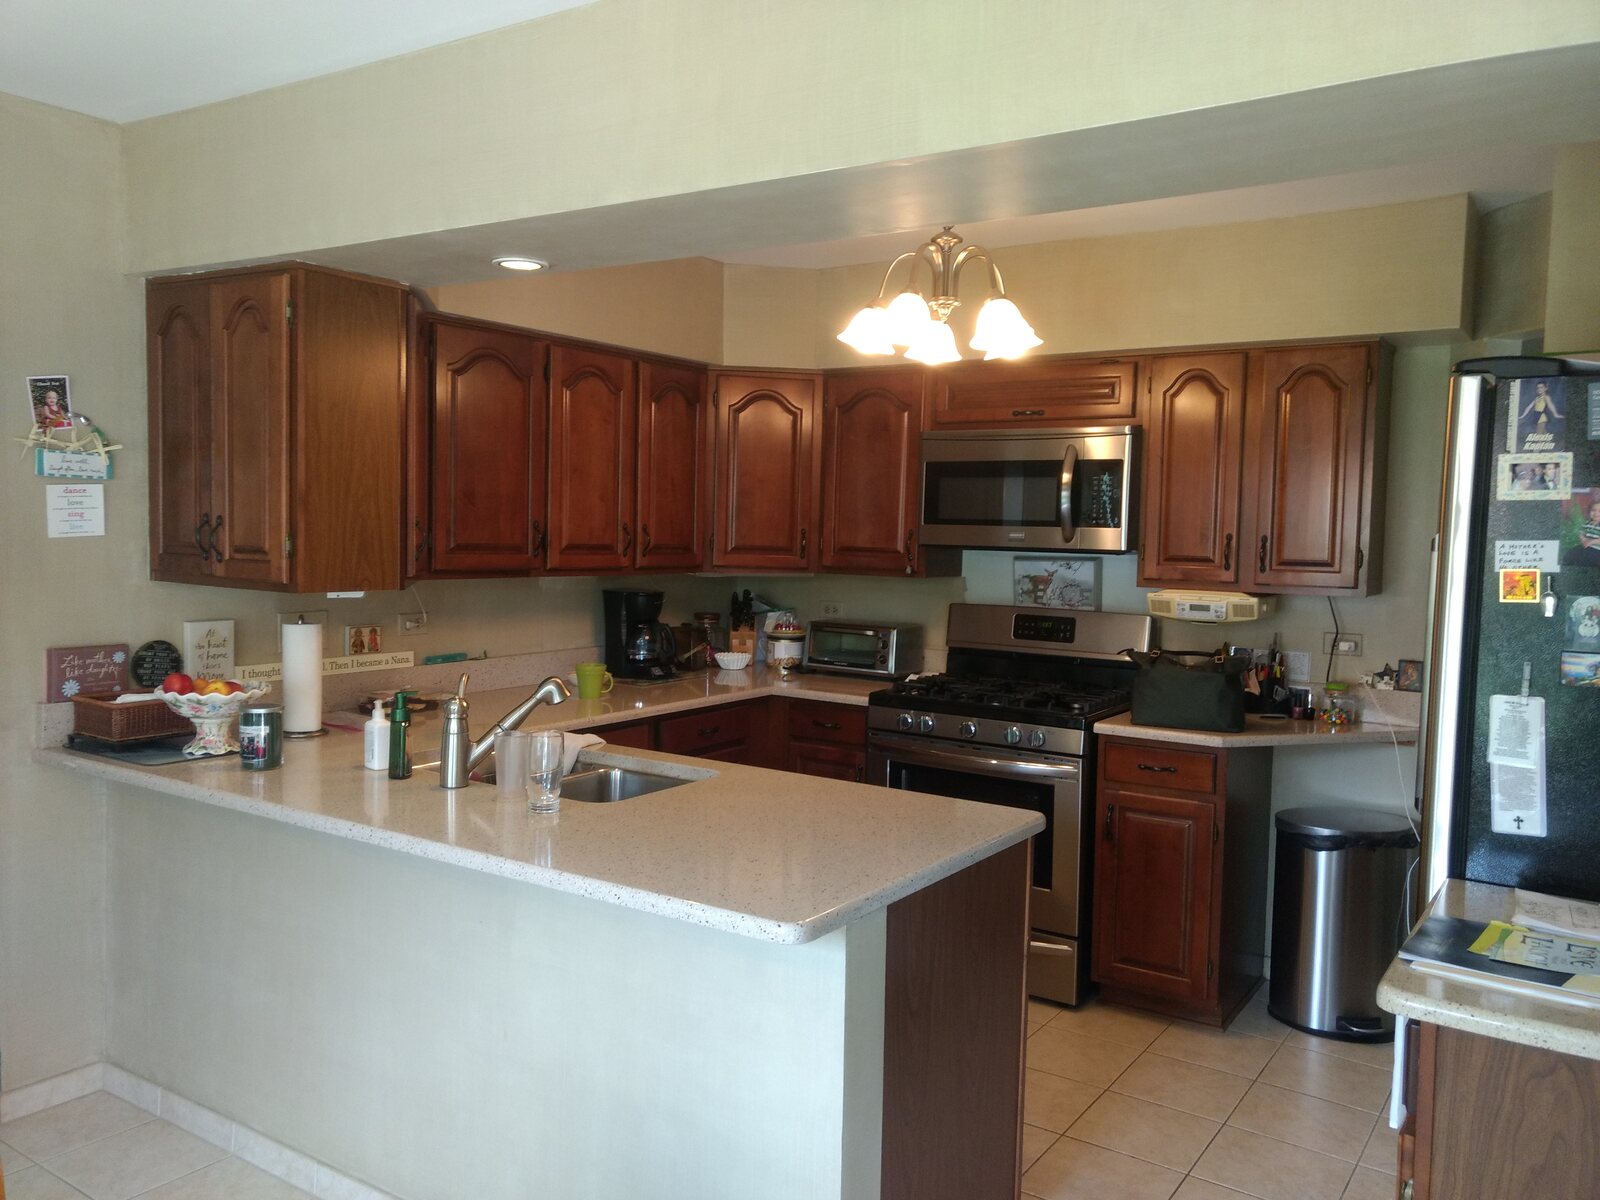 old kitchen with dark red cabinets in arlington heights